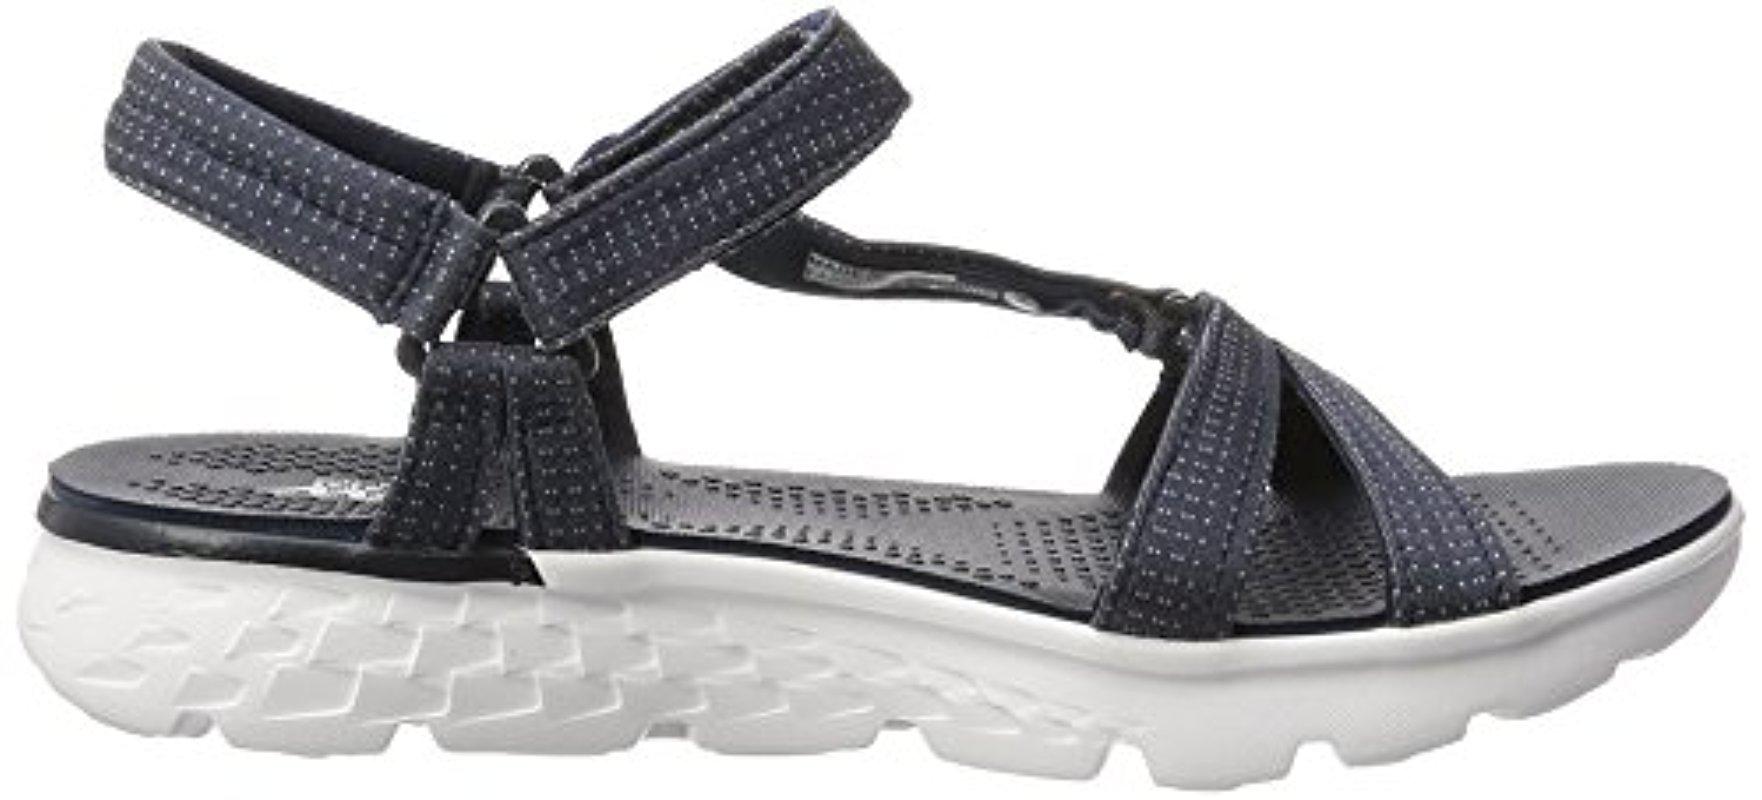 skechers on the go radiance sandals